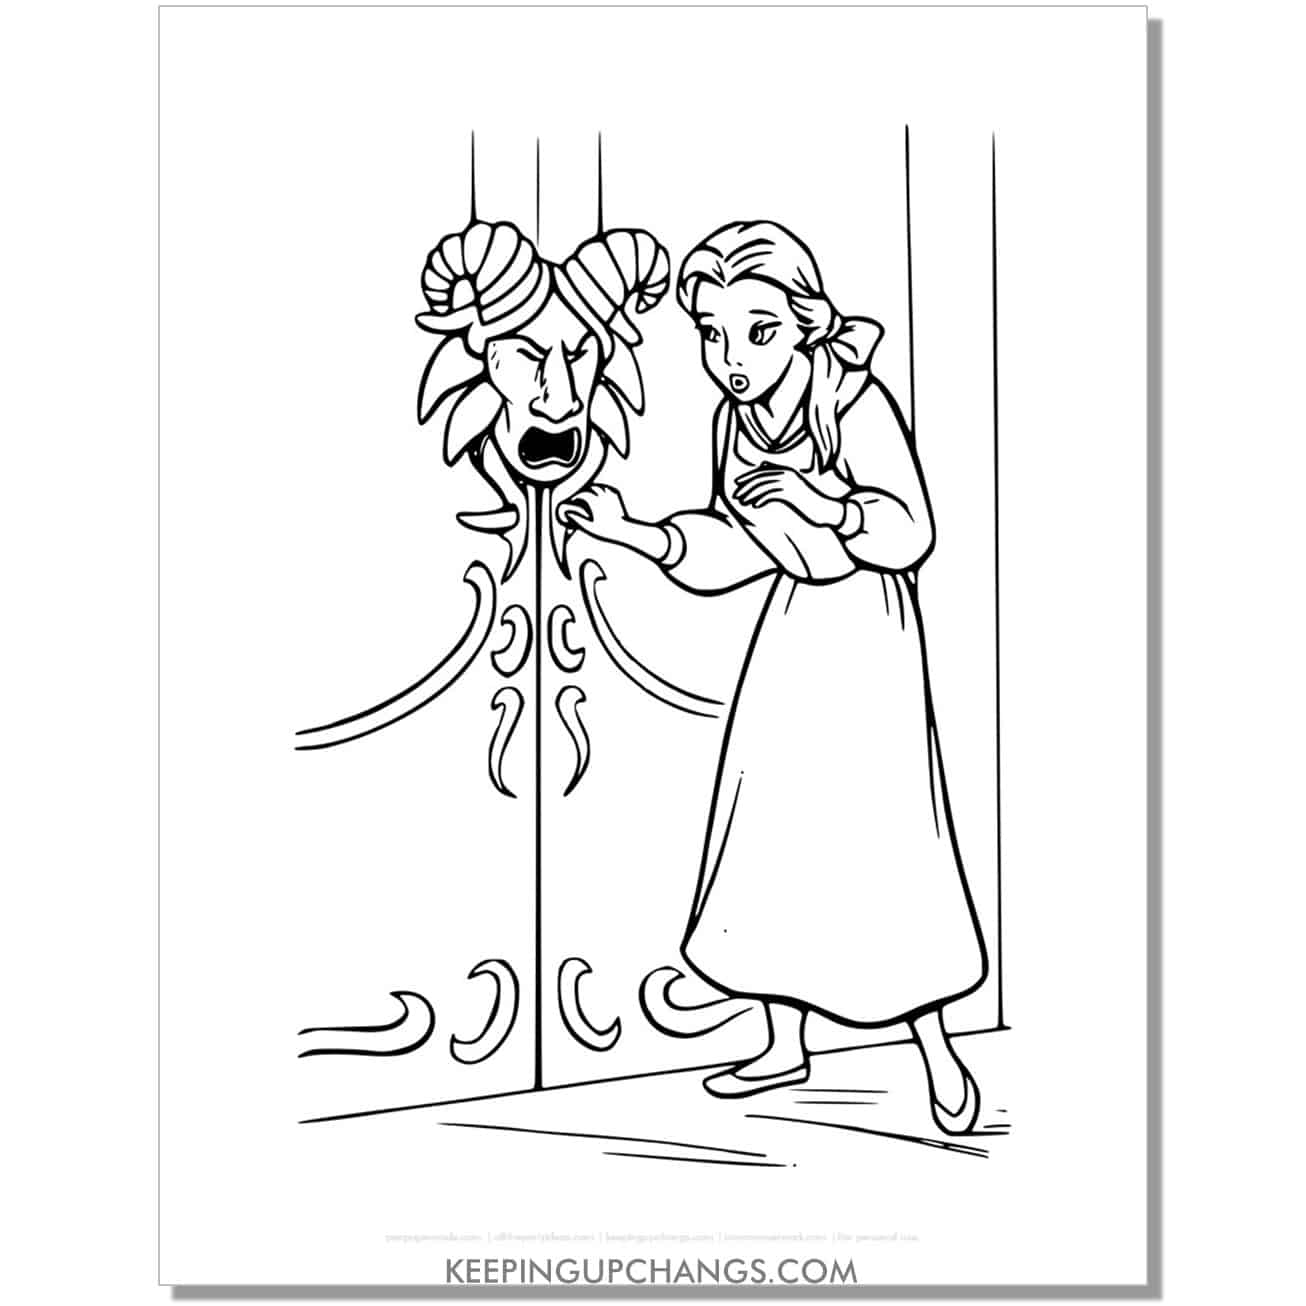 beauty and beast belle tries to enter forbidden room coloring page, sheet.